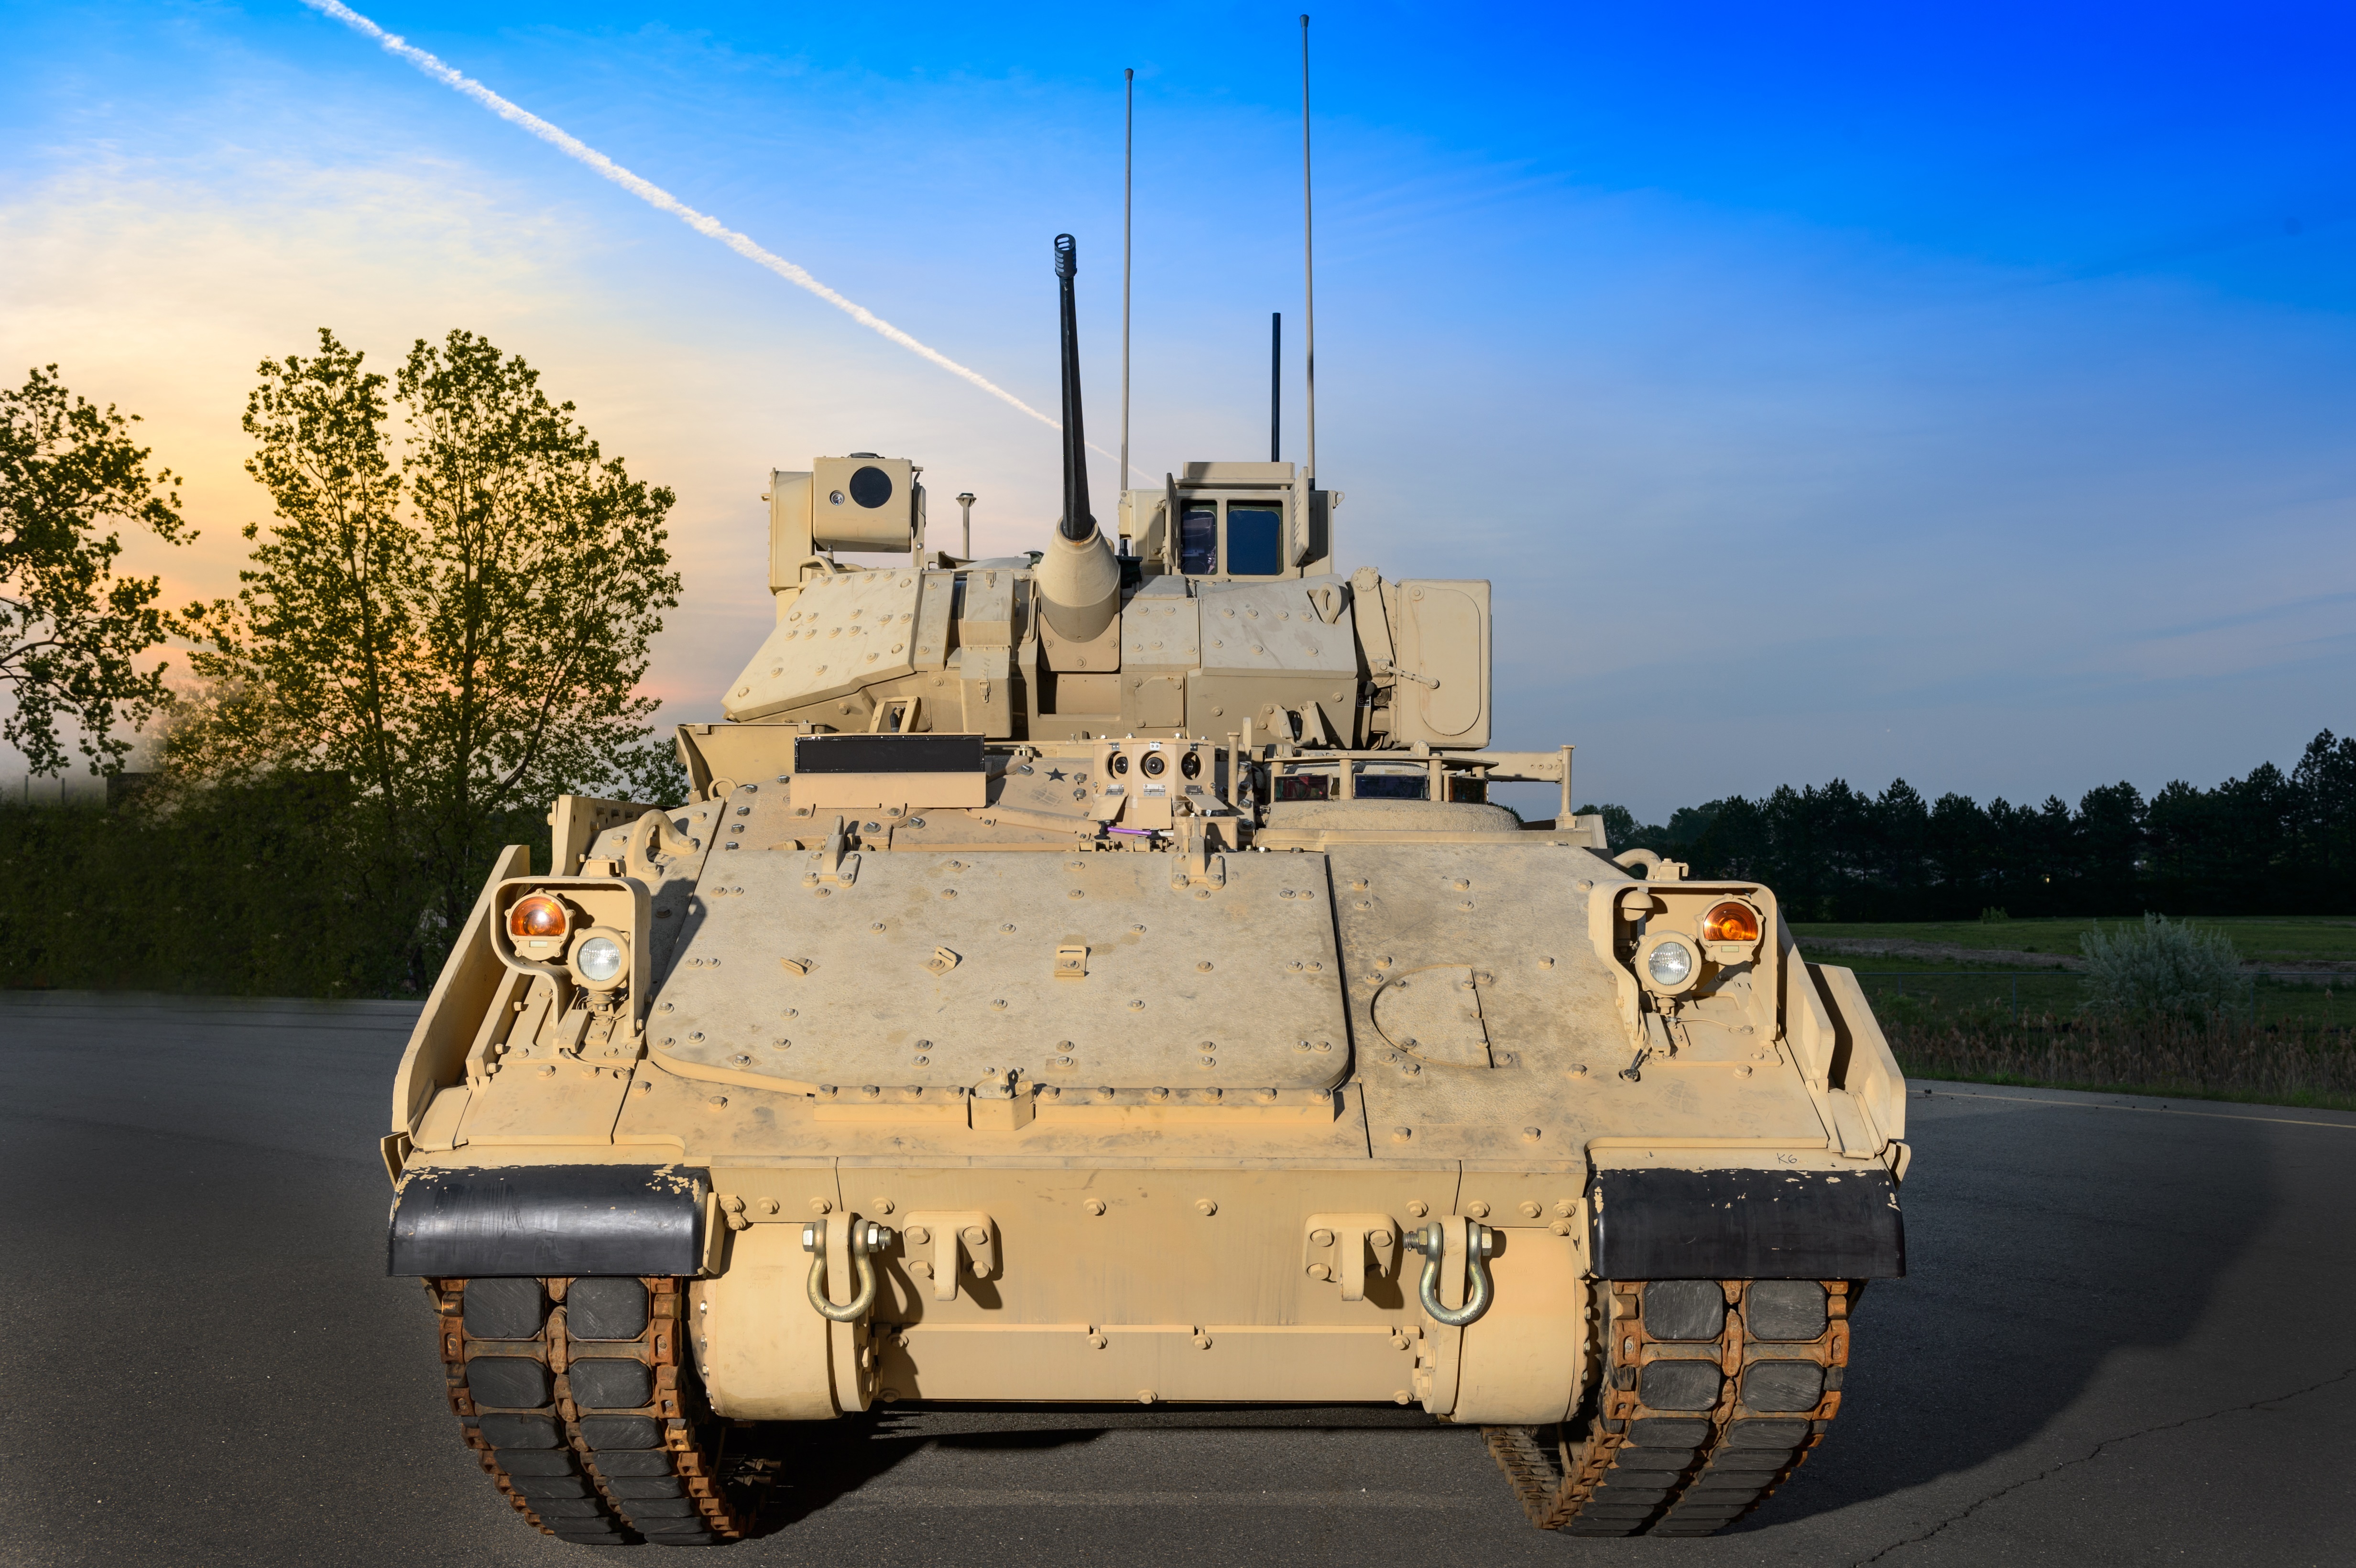 U.S. Army extends contract for Bradley Fighting Vehicle upgrades